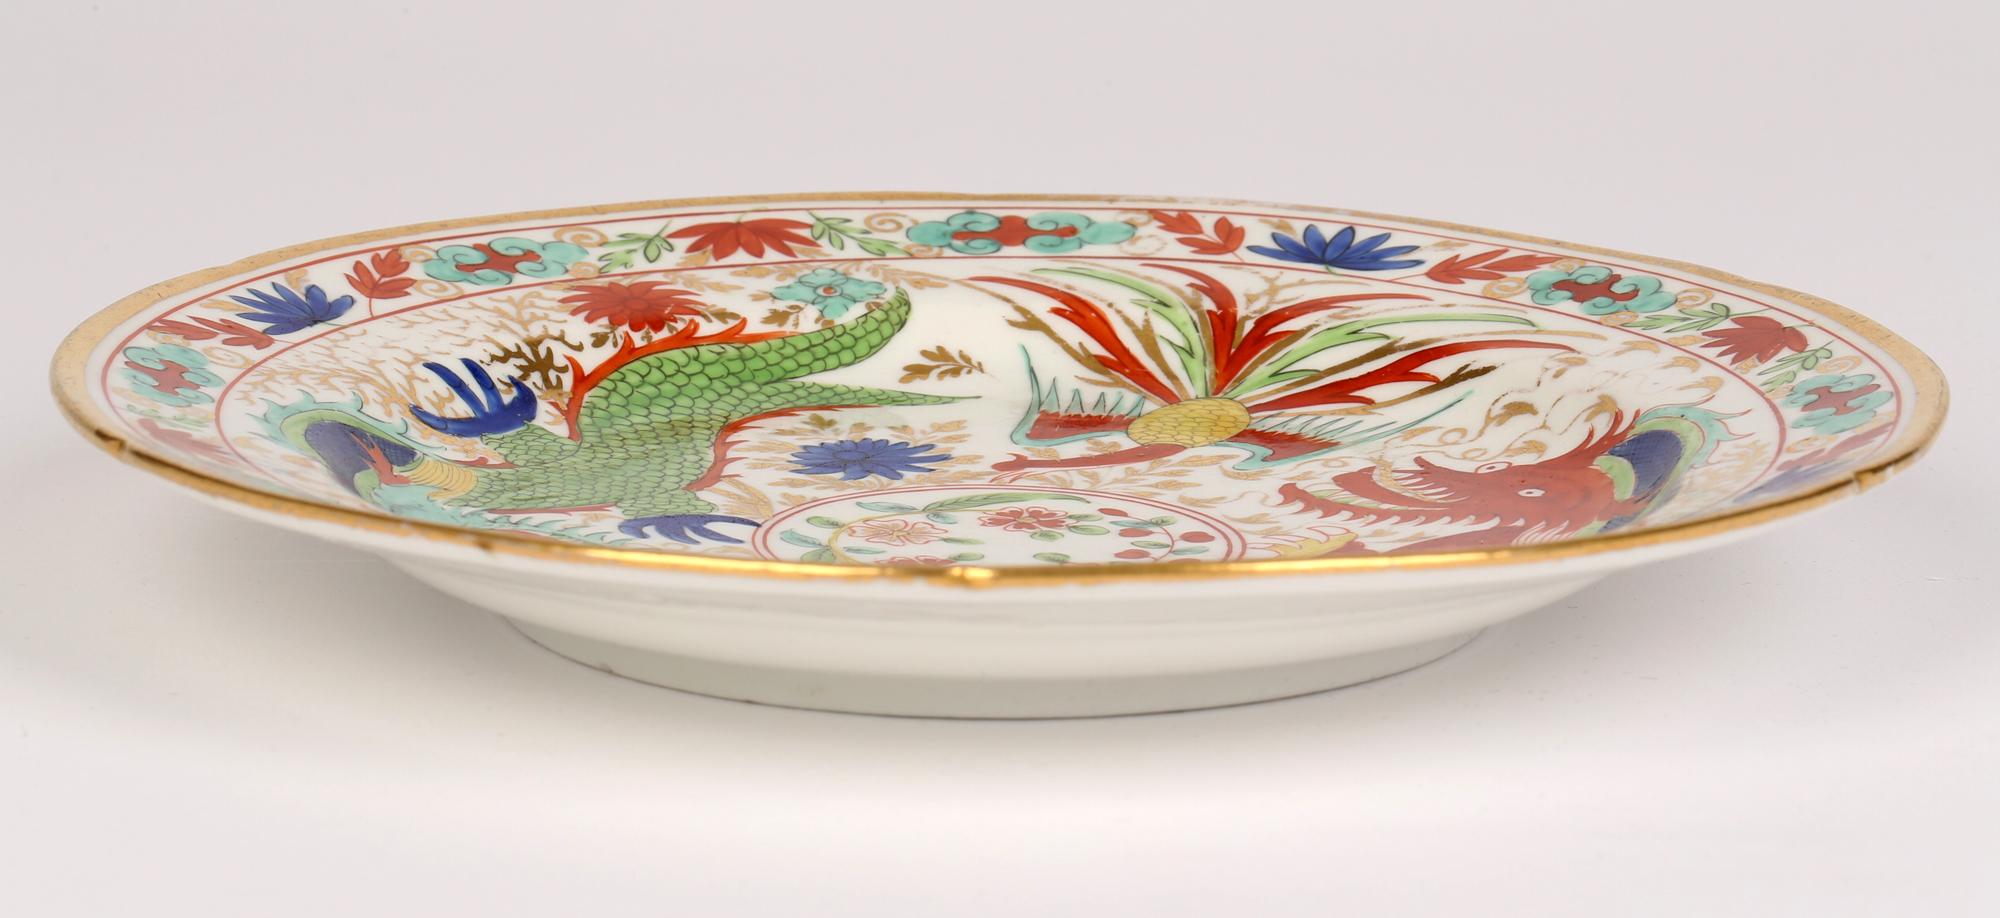 A rare and early English porcelain cabinet plate hand painted with Chinese dragons and phoenix birds and probably inspired by Chinese porcelain believed to date from the early 19th century. The plate has a raised edge with a shaped rim and is hand